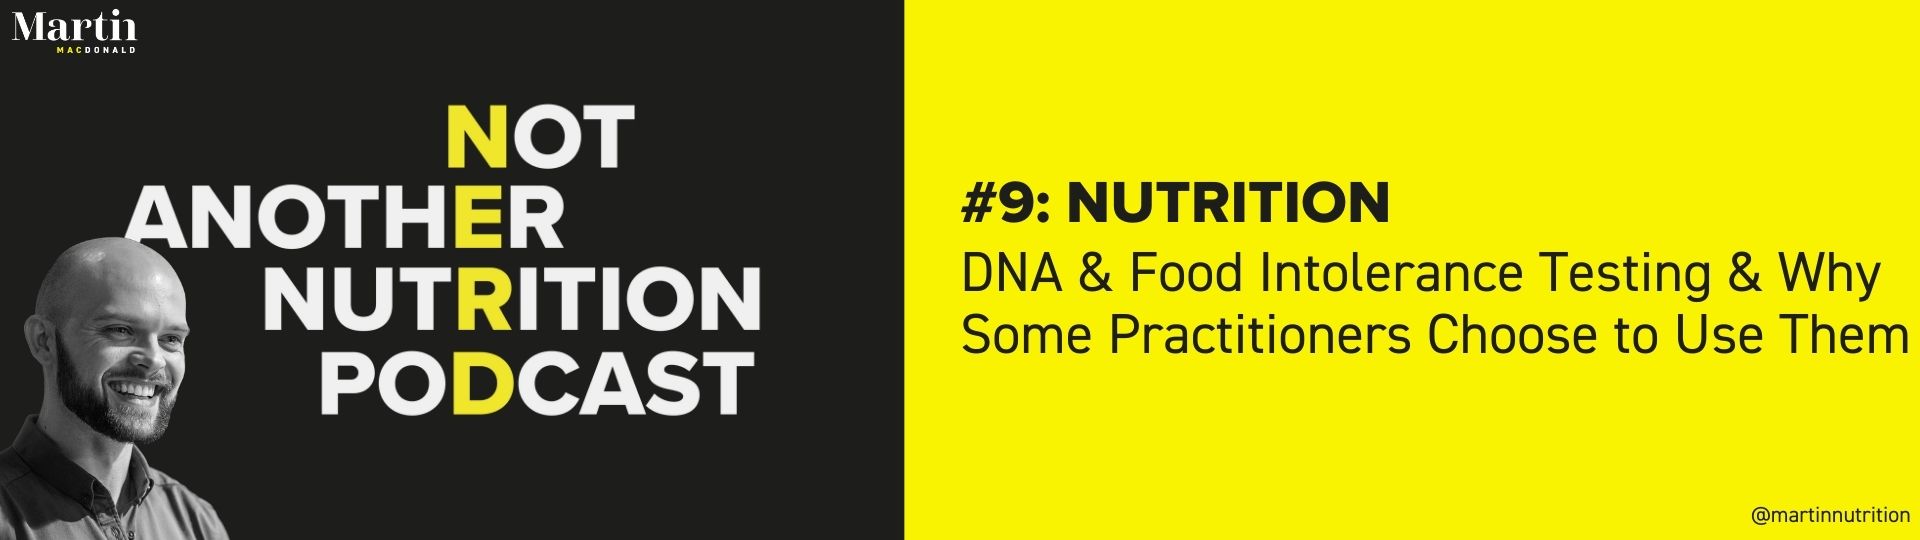 DNA & Food Intolerance Testing & Why Some Practitioners Choose to Use Them